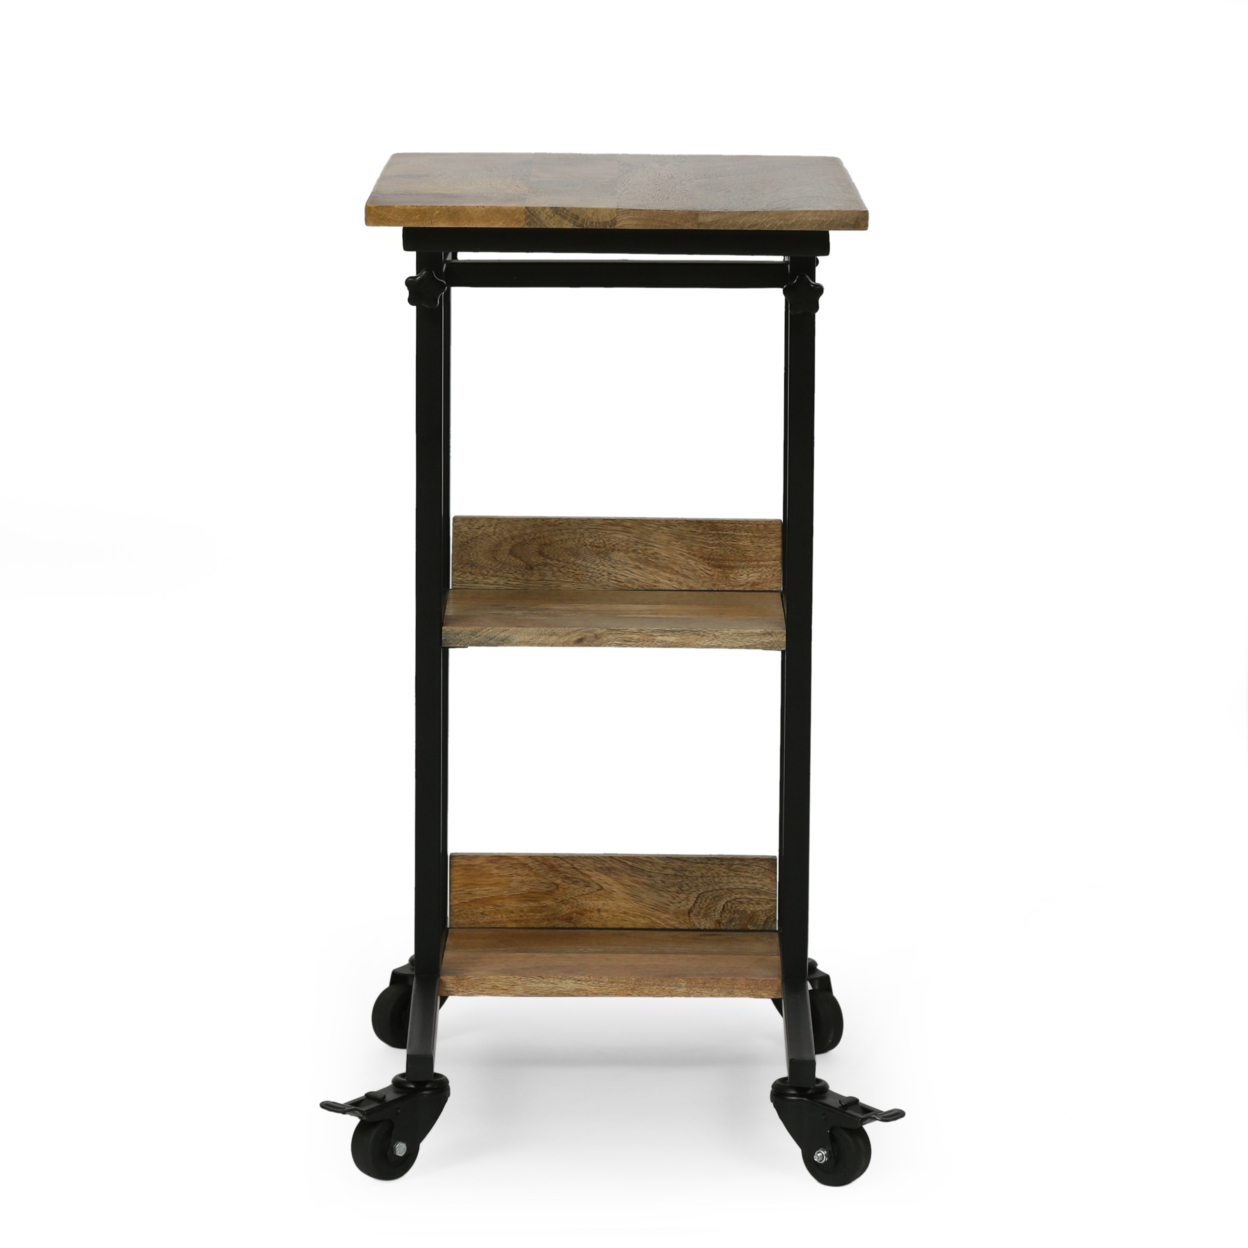 Vinton Modern Industrial Handcrafted Wooden Multi-Purpose Adjustable Height C-Shaped Side Table, Natural And Black